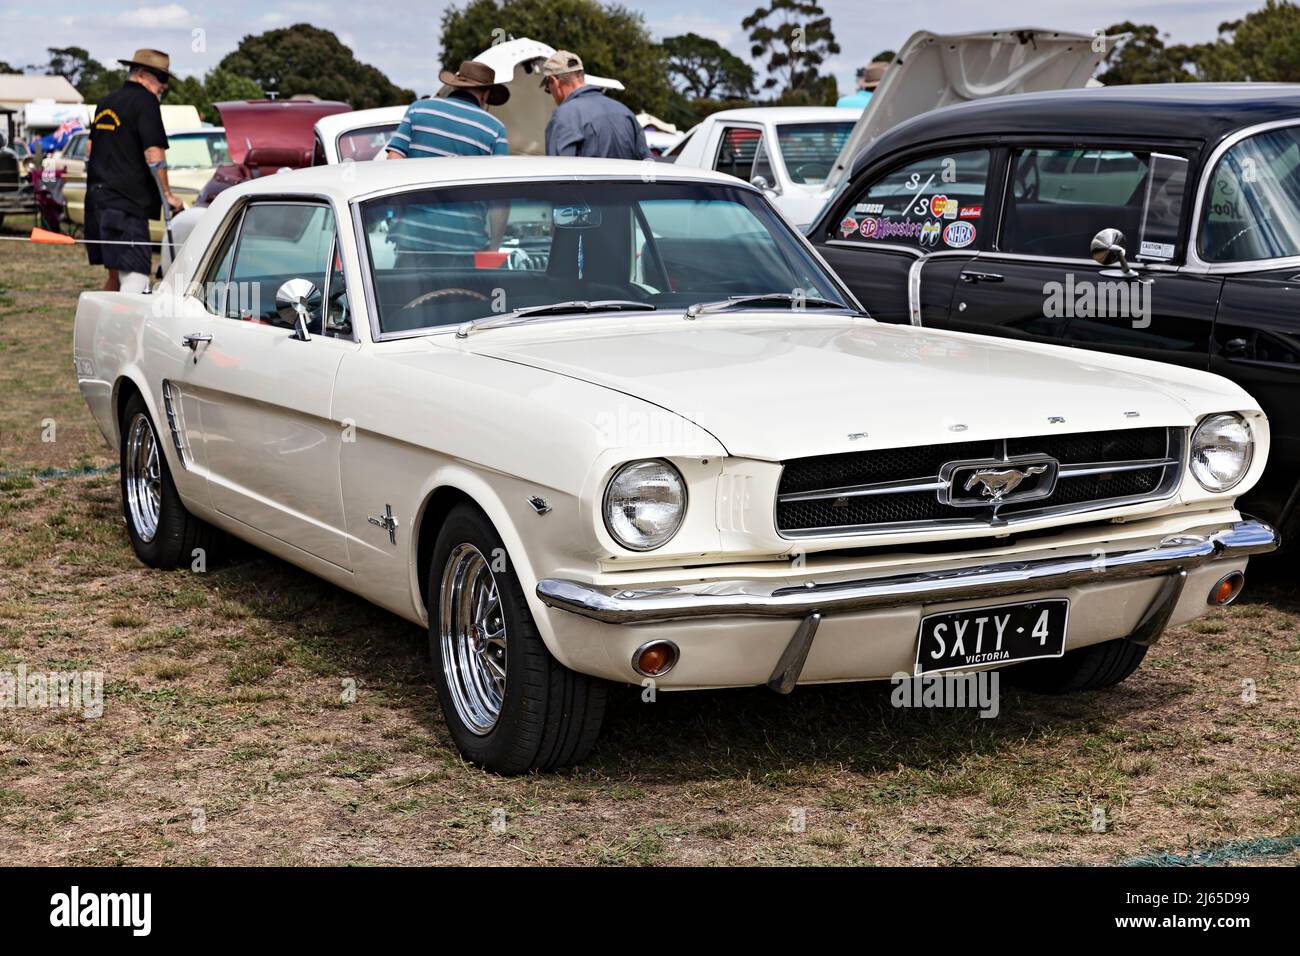 Cars Australia / Classic 1964 Mustang 2 door hardtop car in the 1850`s gold mining town of Clunes in Victoria Australia. Stock Photo